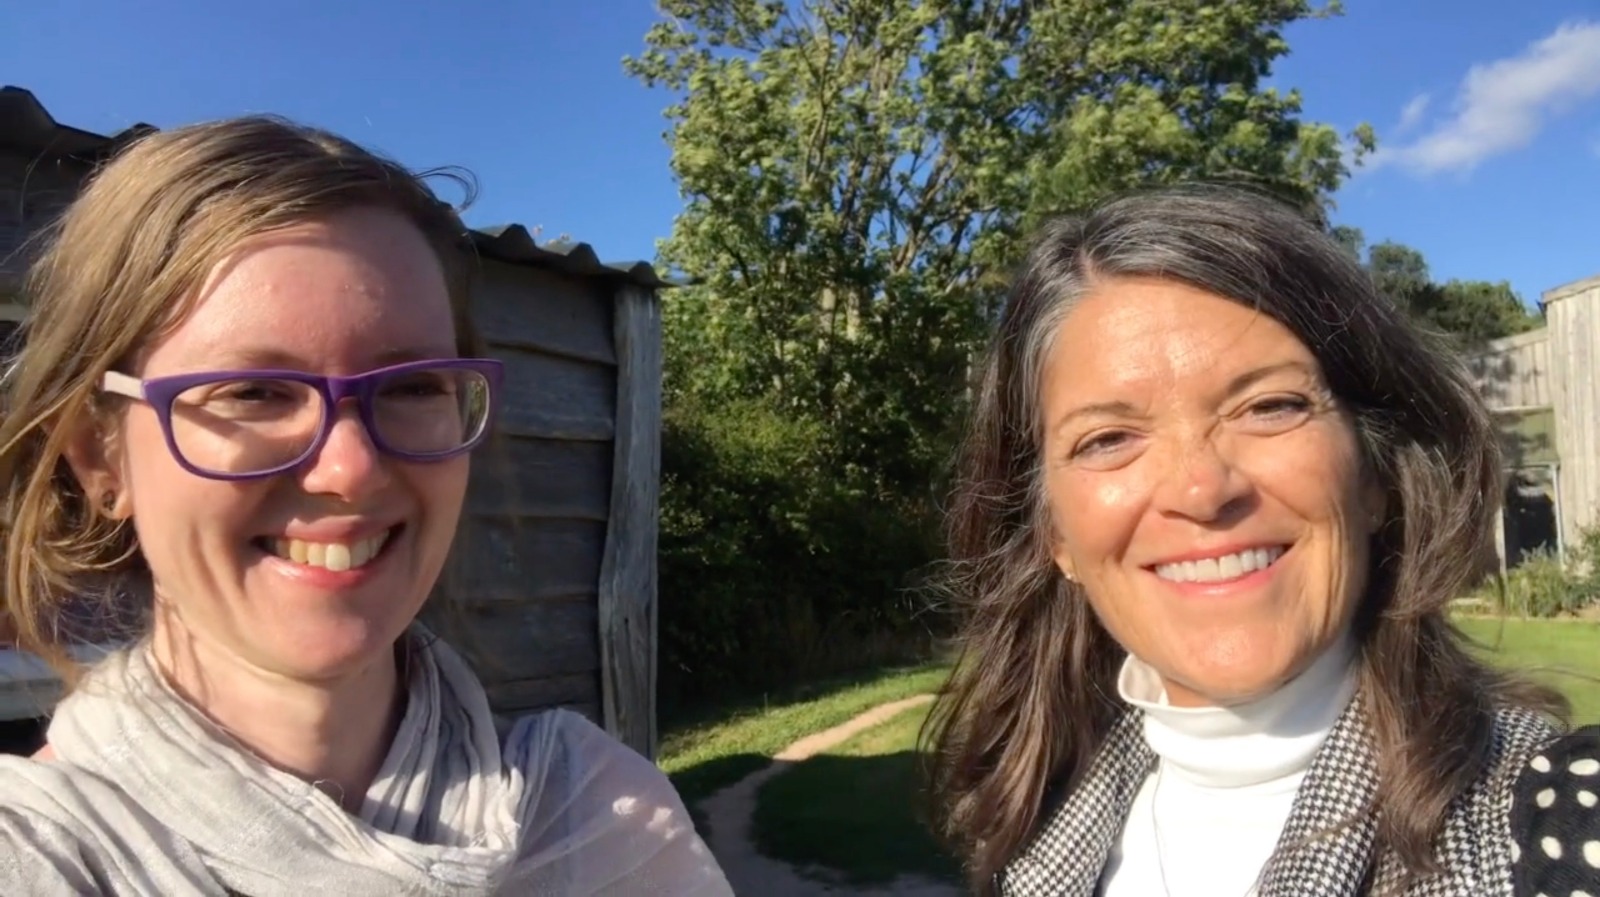 Phoebe Blackburn, Communication & Sustainability Consultant shares her One Minute Message in Episode 36, with Katherine Robertson-Pilling, Strategic Creativity Coach and Author, “Wheel of Creativity”